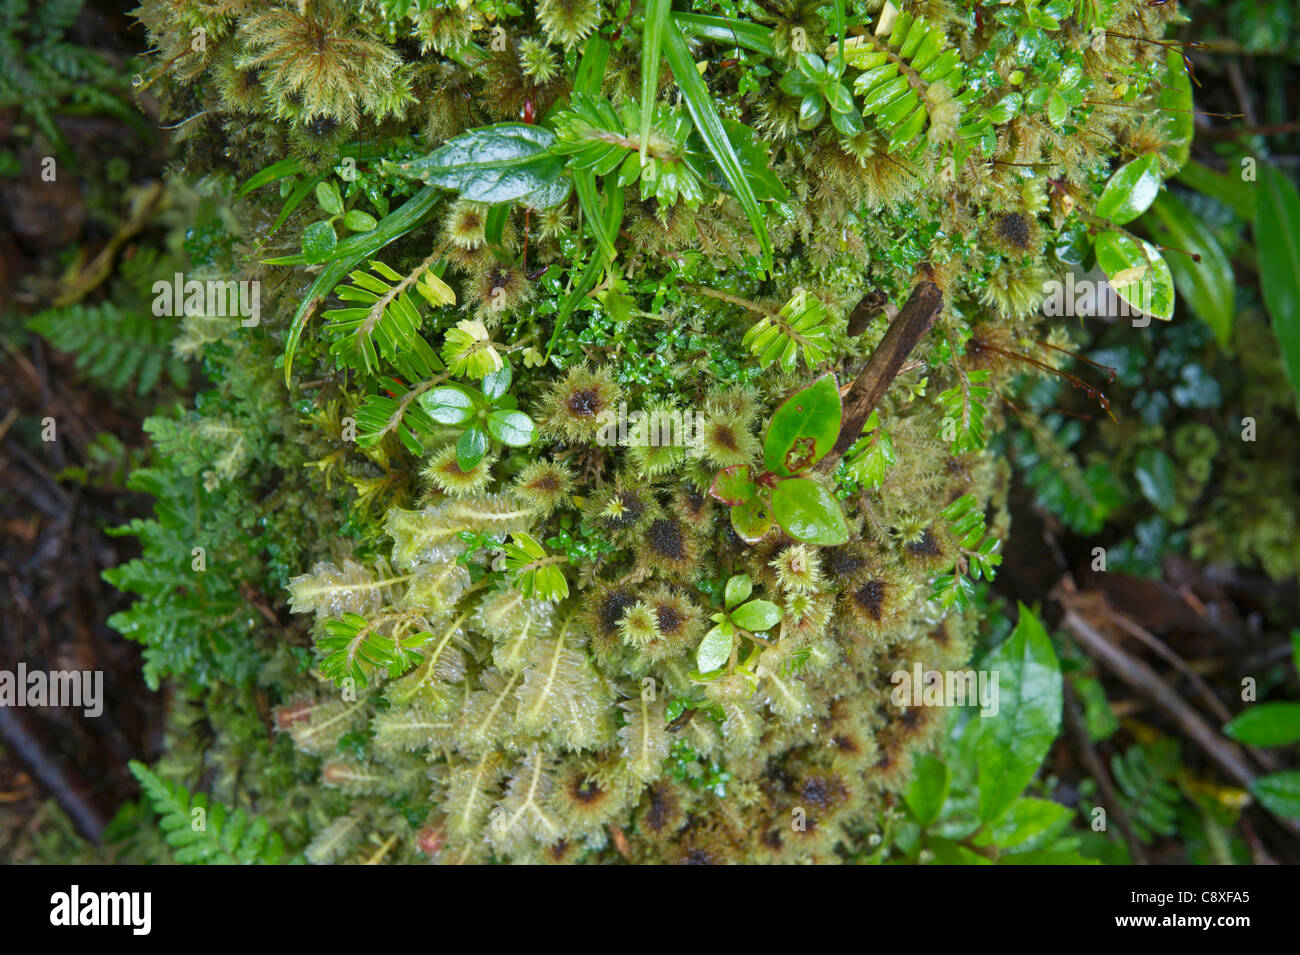 Moss and Liverwort detail on log in montane forest near Mt Hagen Western Highlands Papua New Guinea Stock Photo